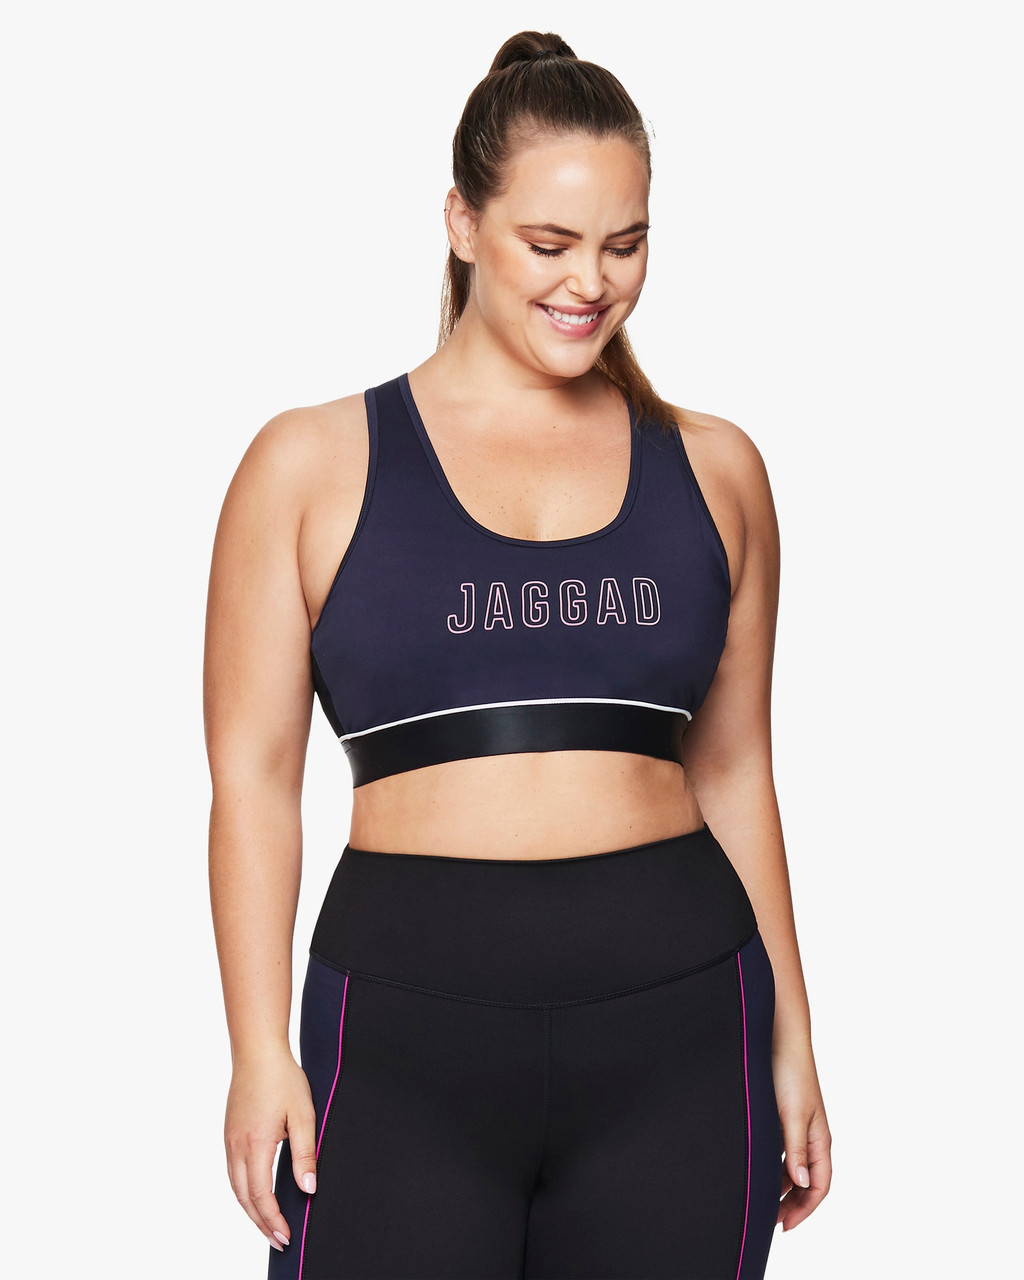 Jaggad - The Afterpay day sale is here. 💥 FREE Crop bra